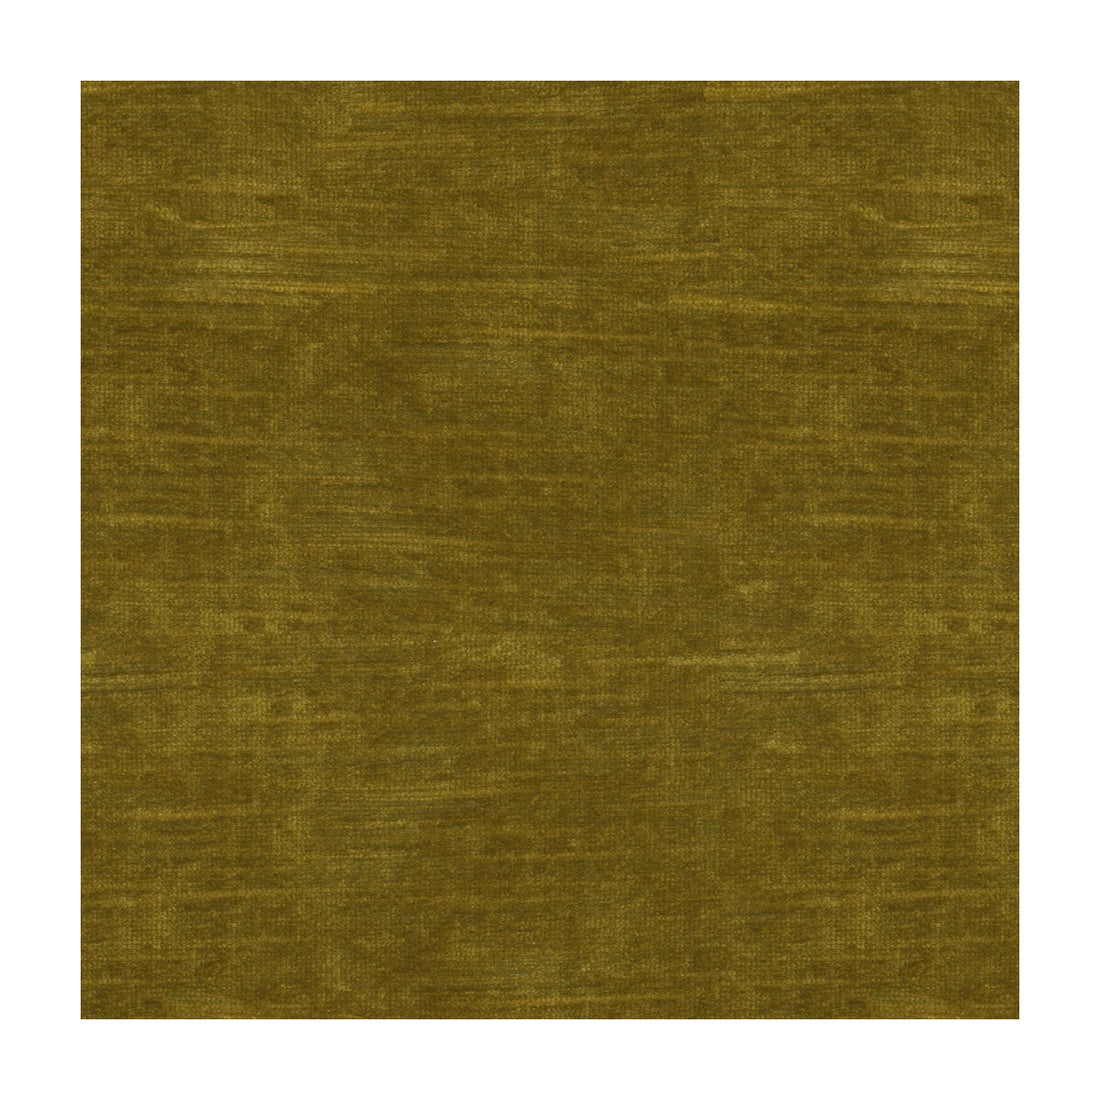 High Impact fabric in mustard color - pattern 34329.130.0 - by Kravet Couture